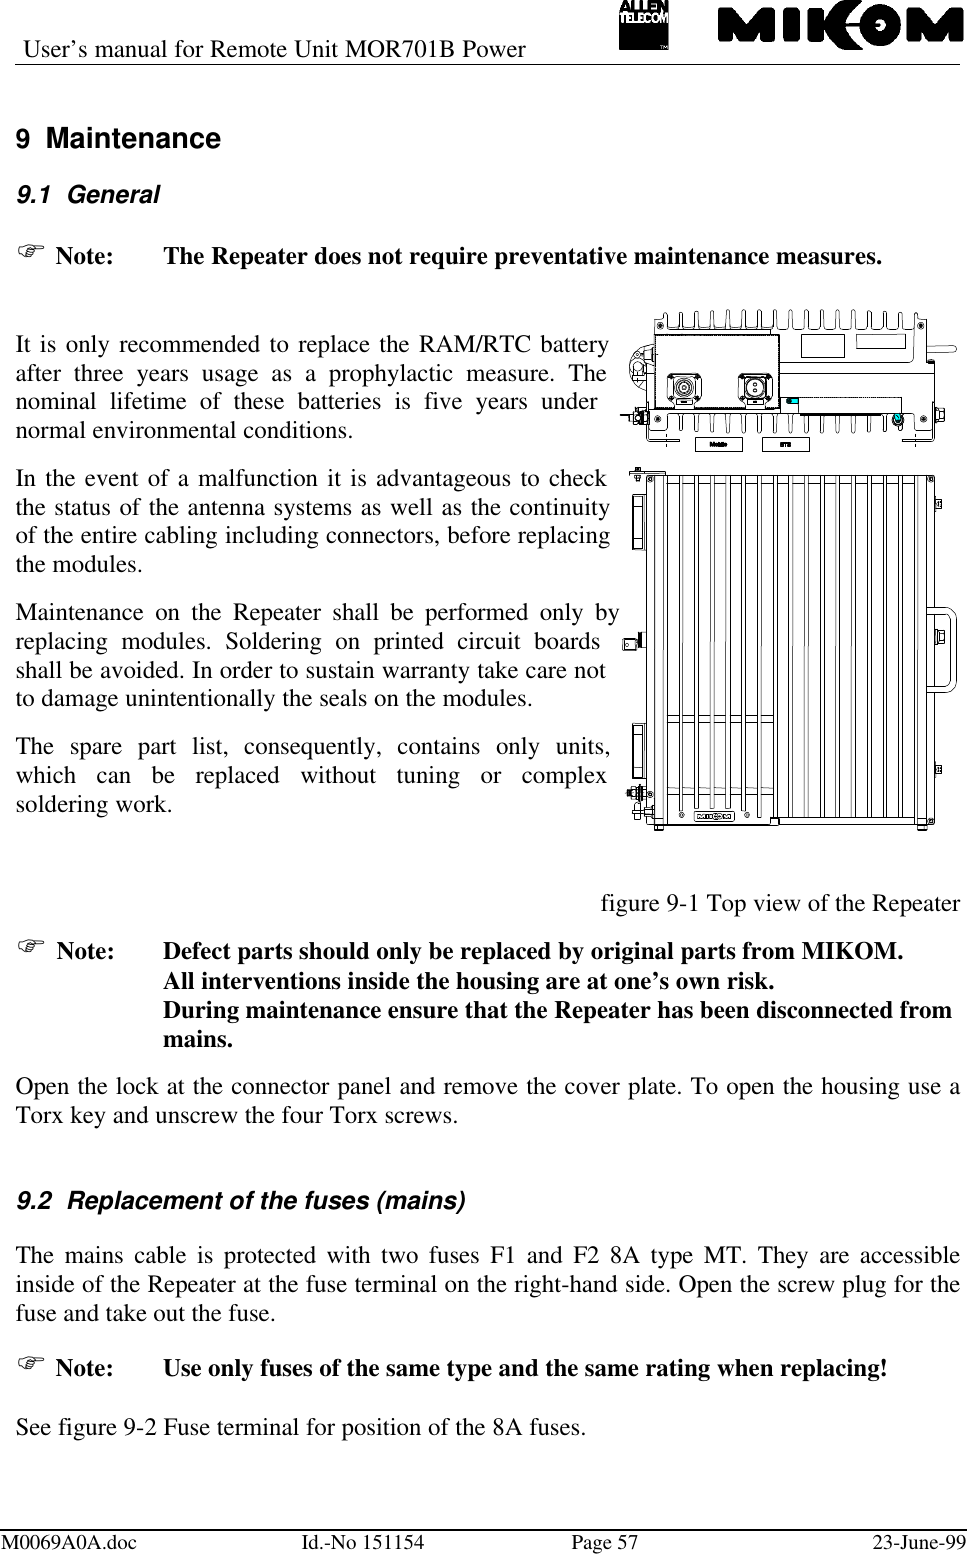 User’s manual for Remote Unit MOR701B PowerM0069A0A.doc Id.-No 151154 Page 57 23-June-999 Maintenance9.1 GeneralF Note:  The Repeater does not require preventative maintenance measures.It is only recommended to replace the RAM/RTC batteryafter three years usage as a prophylactic measure. Thenominal lifetime of these batteries is five years undernormal environmental conditions.In the event of a malfunction it is advantageous to checkthe status of the antenna systems as well as the continuityof the entire cabling including connectors, before replacingthe modules.Maintenance on the Repeater shall be performed only byreplacing modules. Soldering on printed circuit boardsshall be avoided. In order to sustain warranty take care notto damage unintentionally the seals on the modules.The spare part list, consequently, contains only units,which can be replaced without tuning or complexsoldering work.figure 9-1 Top view of the RepeaterF Note:  Defect parts should only be replaced by original parts from MIKOM.All interventions inside the housing are at one’s own risk.During maintenance ensure that the Repeater has been disconnected frommains.Open the lock at the connector panel and remove the cover plate. To open the housing use aTorx key and unscrew the four Torx screws.9.2 Replacement of the fuses (mains)The mains cable is protected with two fuses F1 and F2 8A type MT. They are accessibleinside of the Repeater at the fuse terminal on the right-hand side. Open the screw plug for thefuse and take out the fuse.F Note:  Use only fuses of the same type and the same rating when replacing!See figure 9-2 Fuse terminal for position of the 8A fuses.